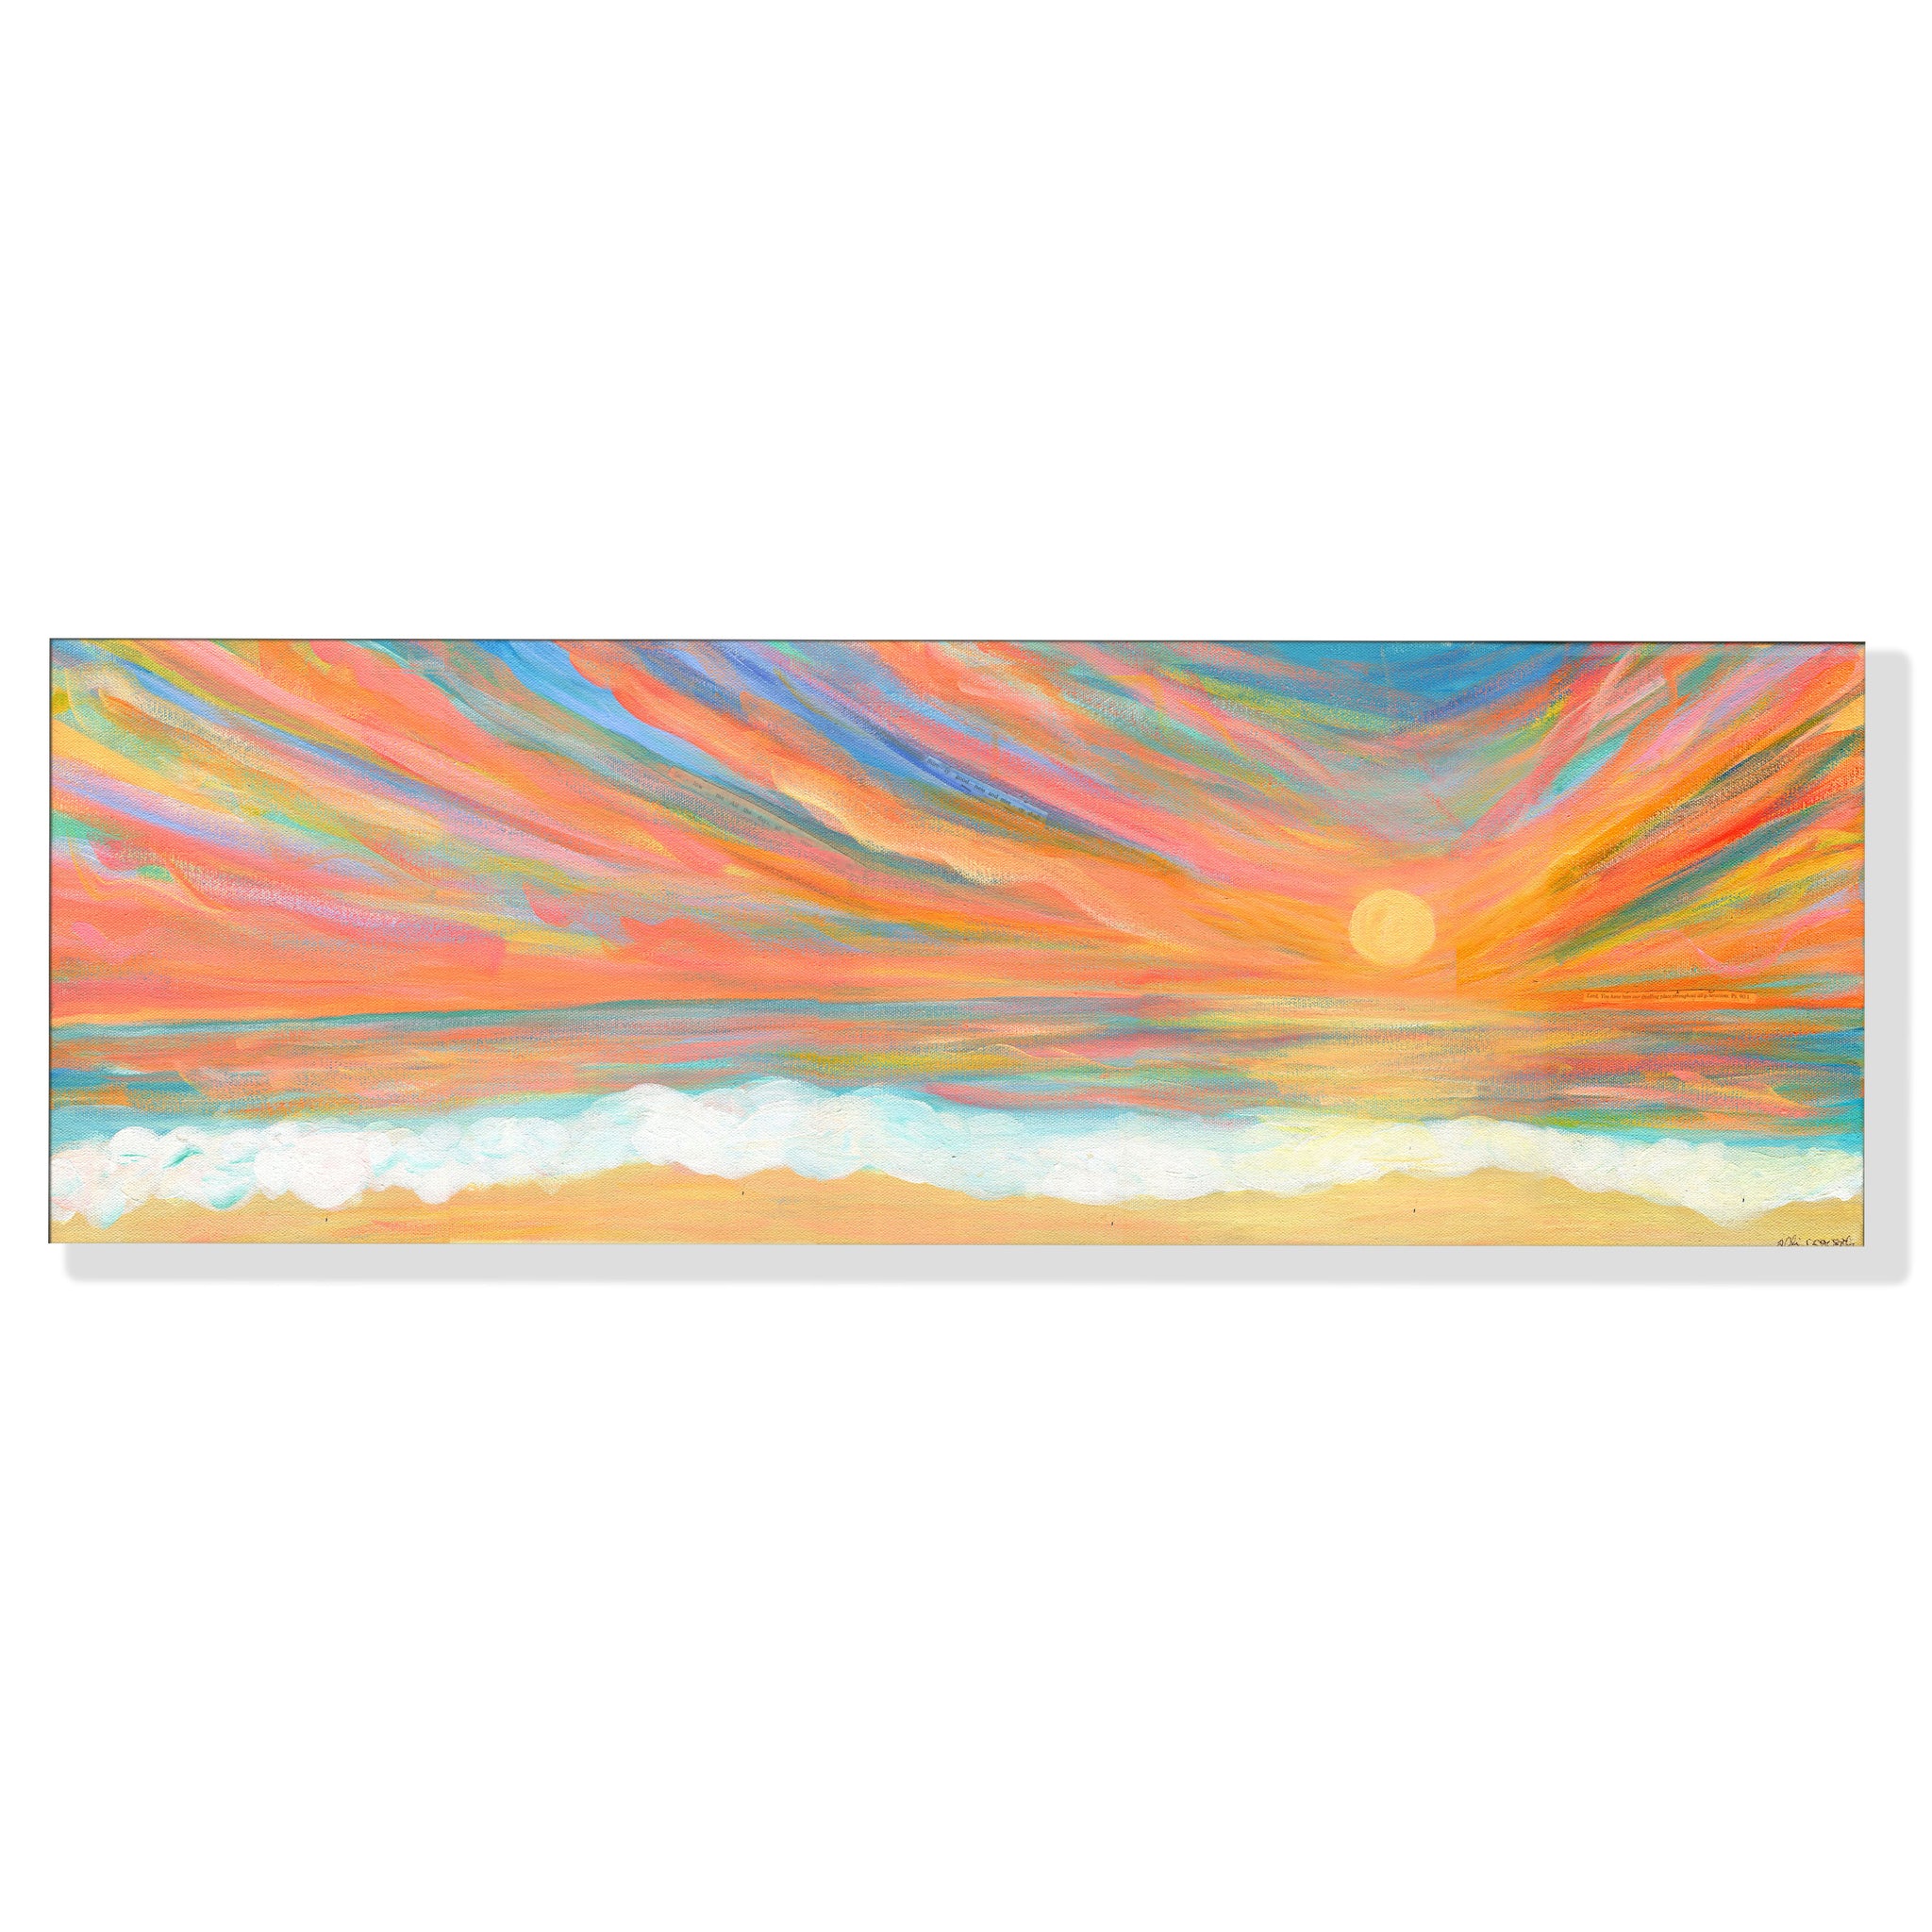 Large Original Panoramic Sunset Painting: "Surely Goodness & Mercy" 12x36 inches